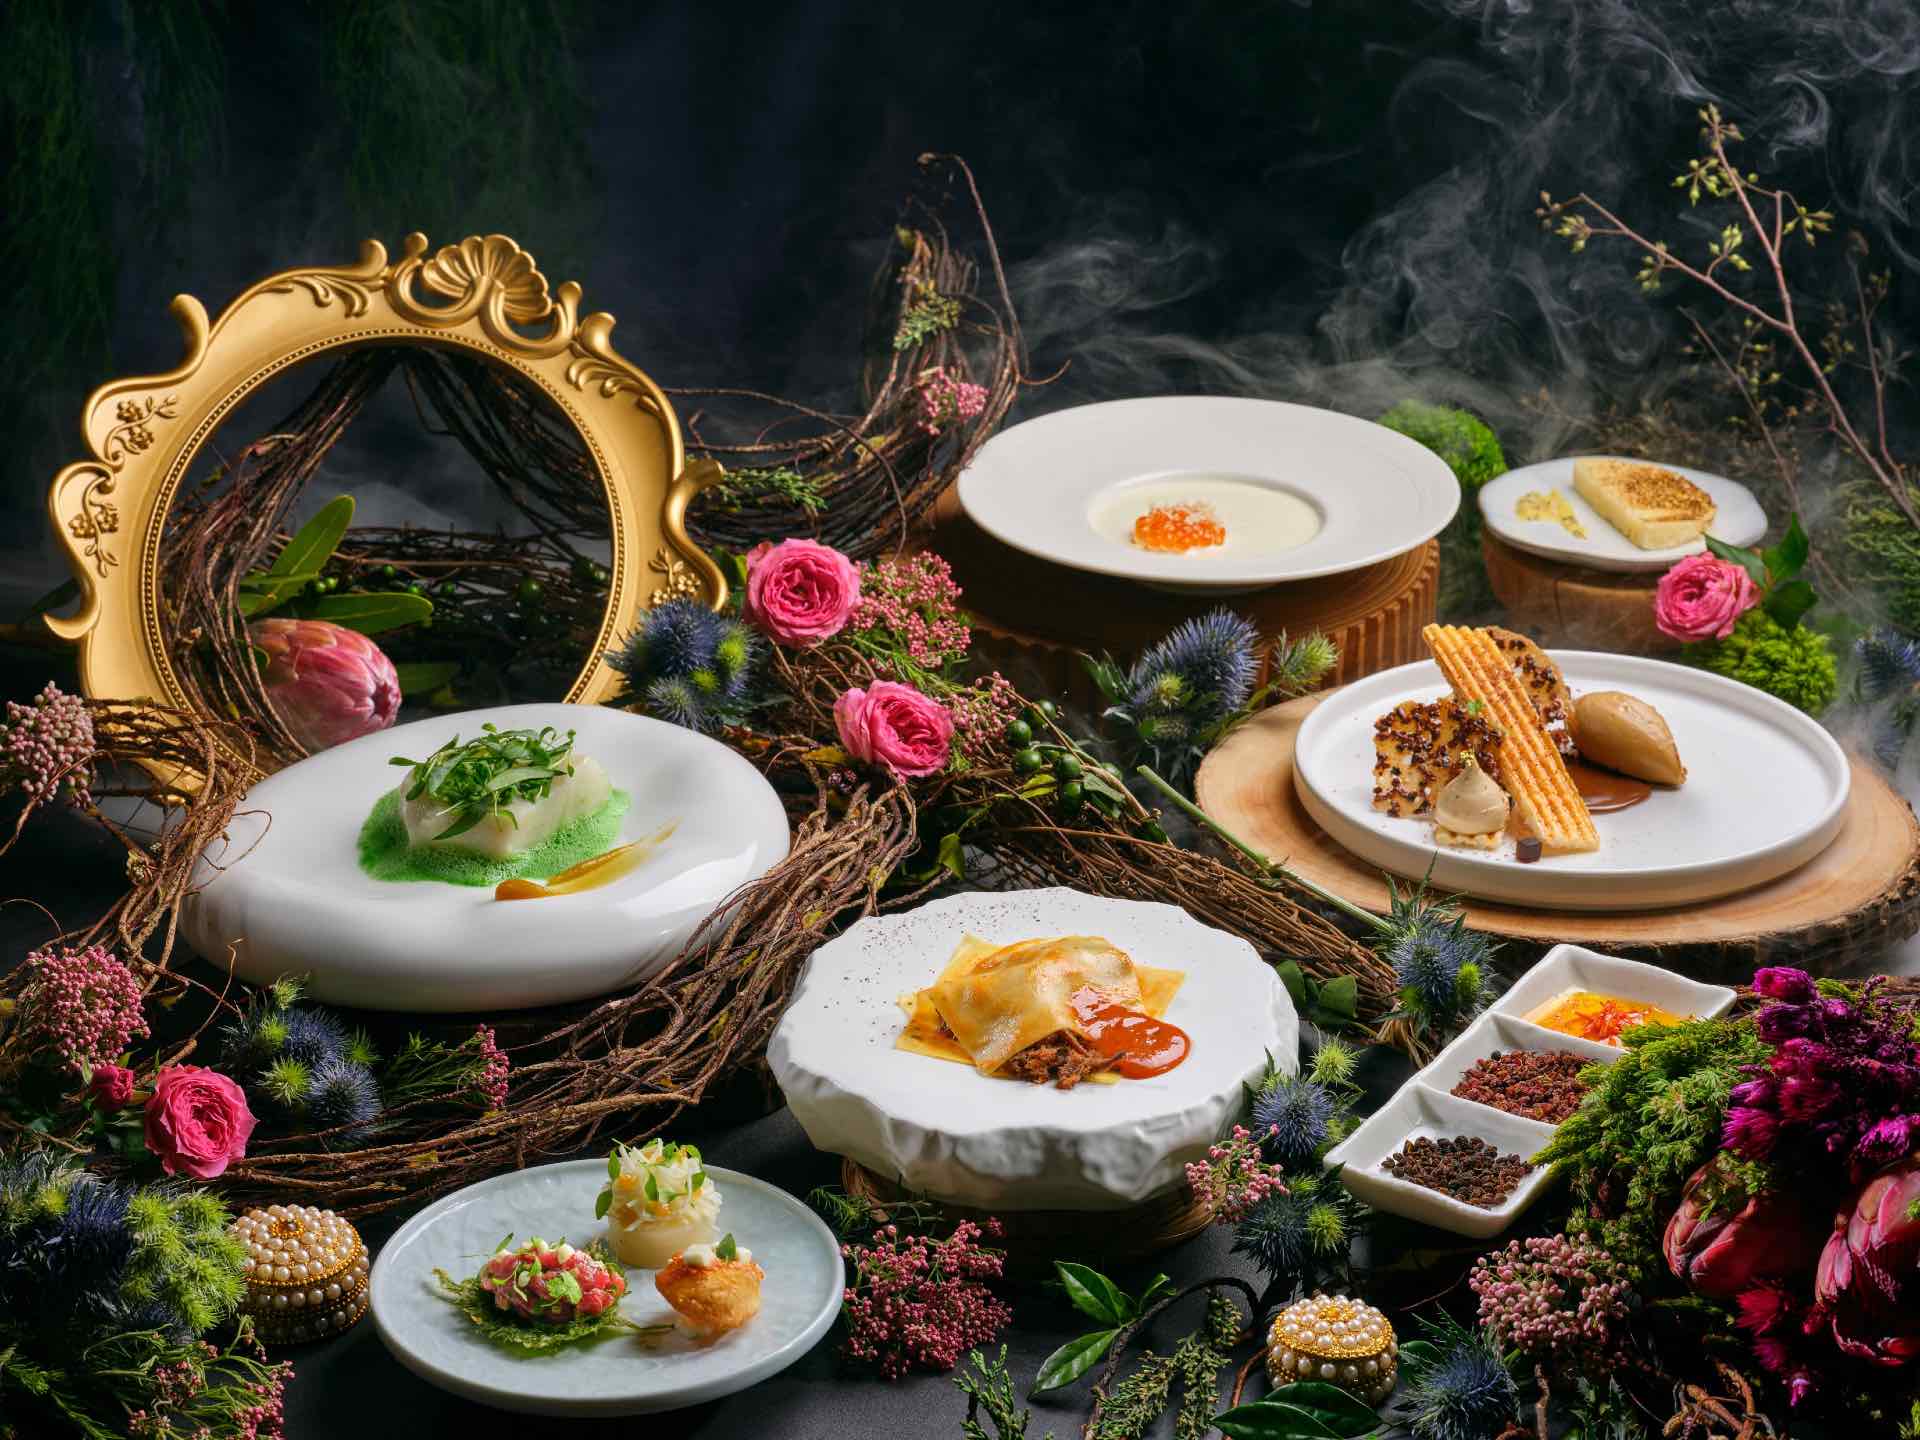 , Enchanted to meet you: Luce at InterContinental Singapore presents the immersive Banquet of Hoshena